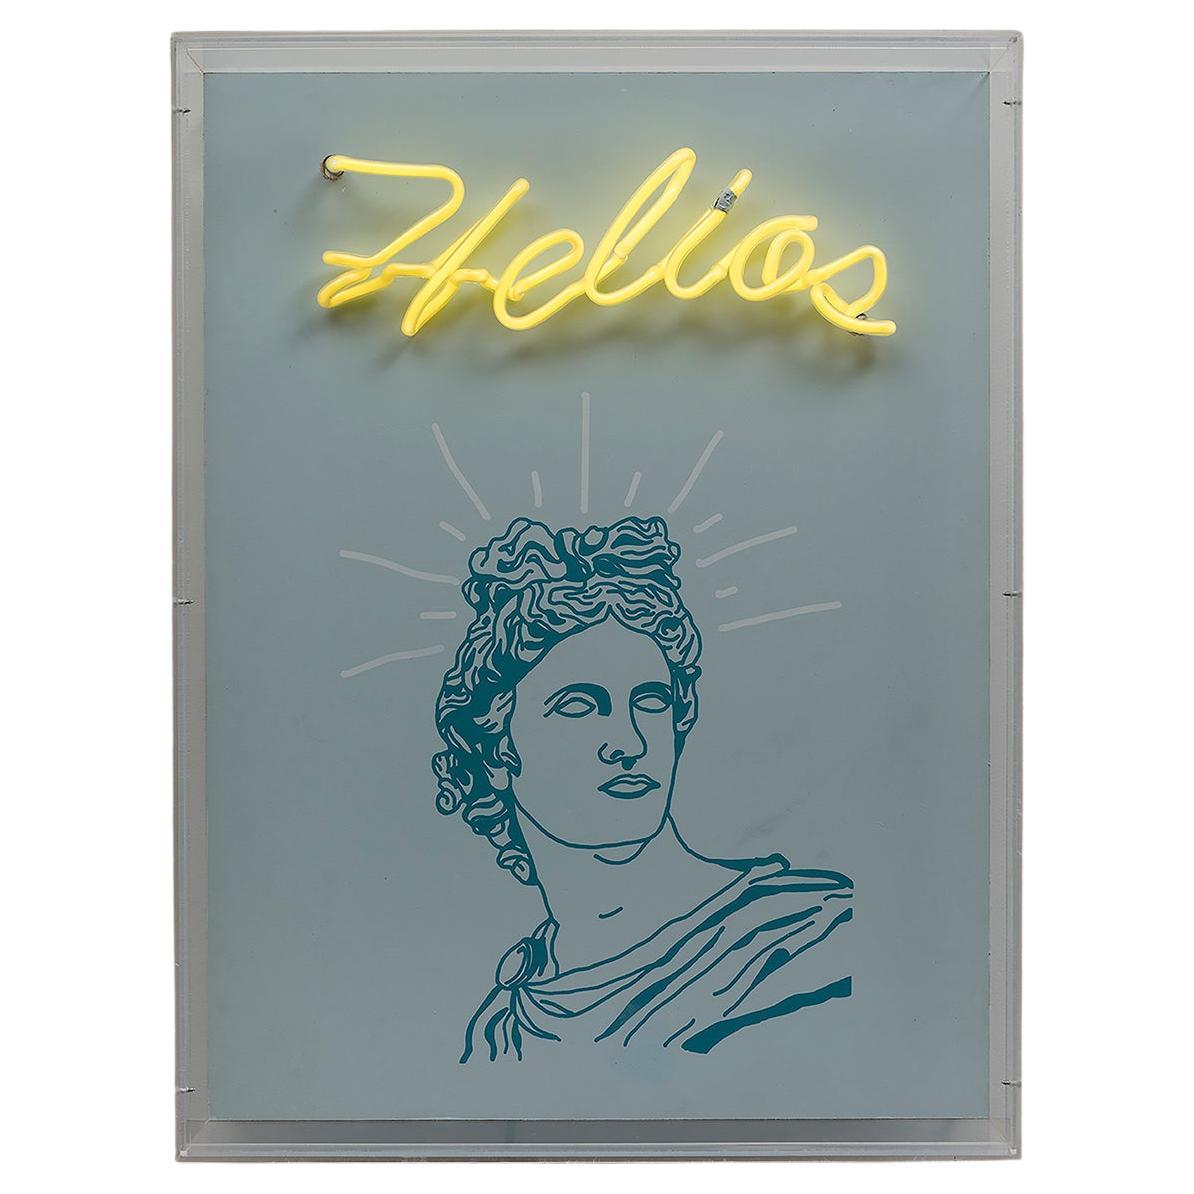 Helios. Neon Light Box Wall Sculpture. From the series Neon Classics For Sale